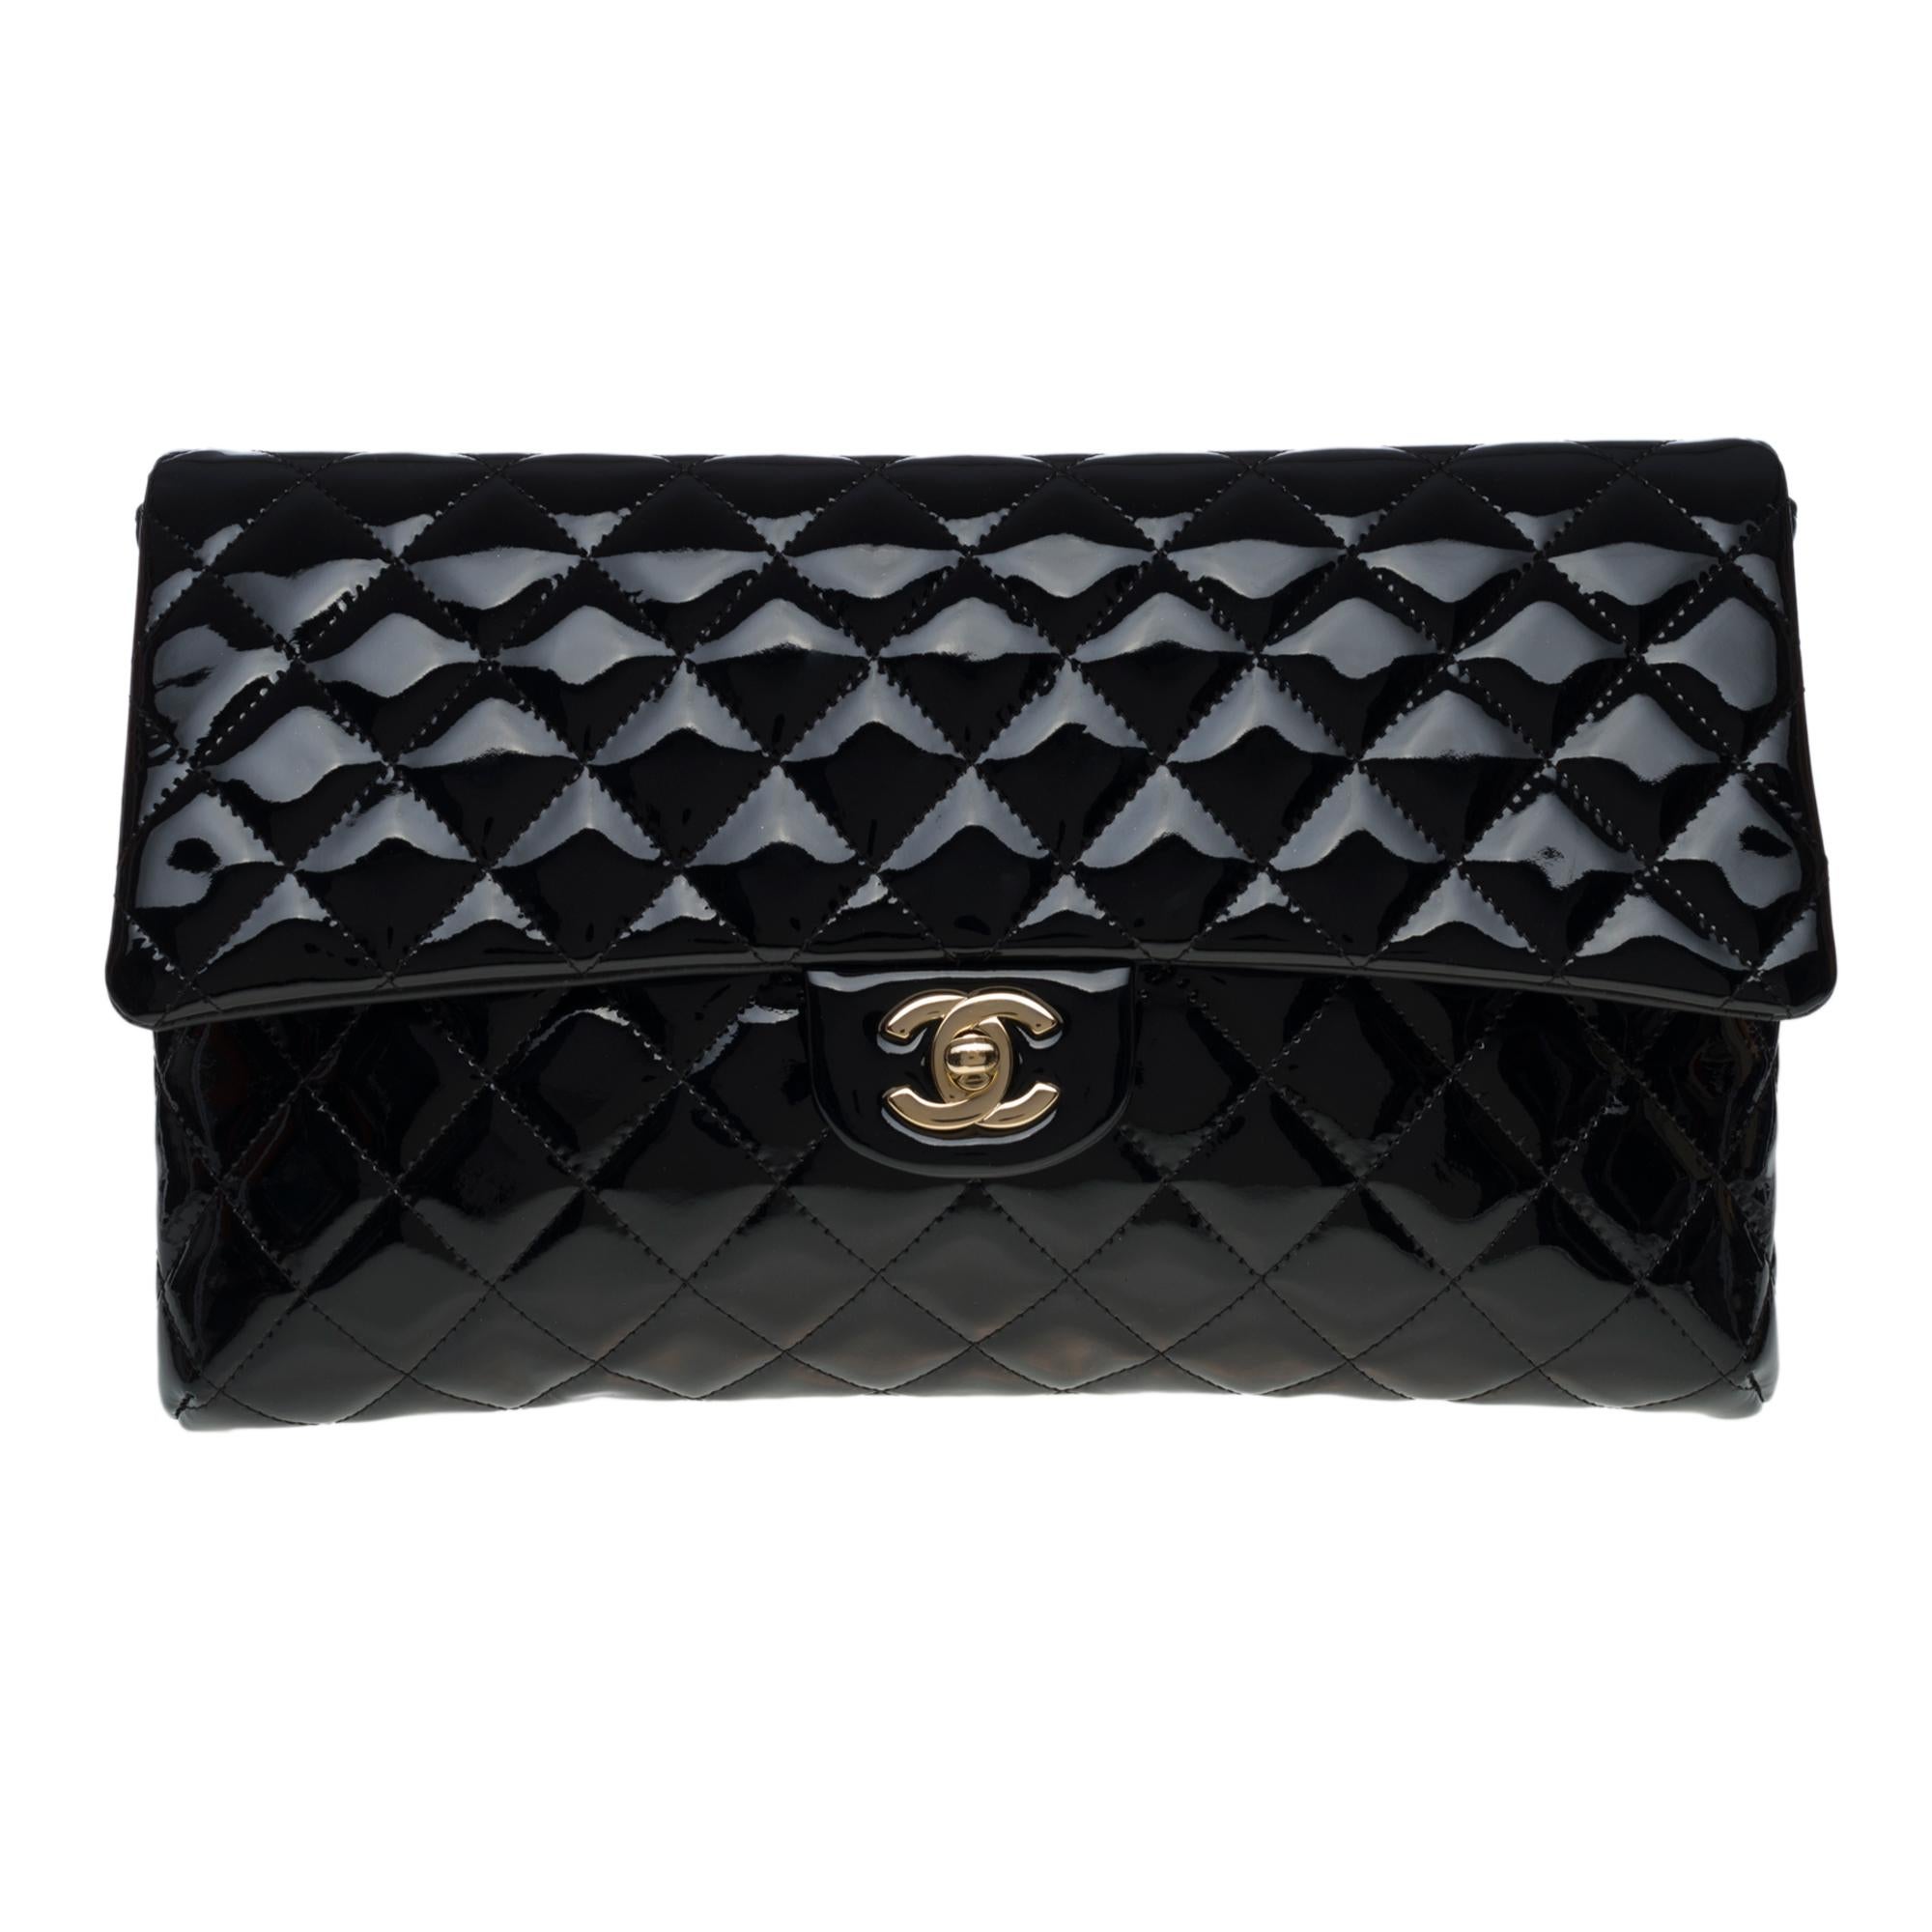 Splendid Chanel clutch bag in black patent quilted leather, champagne metal hardware
Flap closure, CC champagne metal clasp
Single Flap
Black leather lining, one zipped pocket
Signature: 